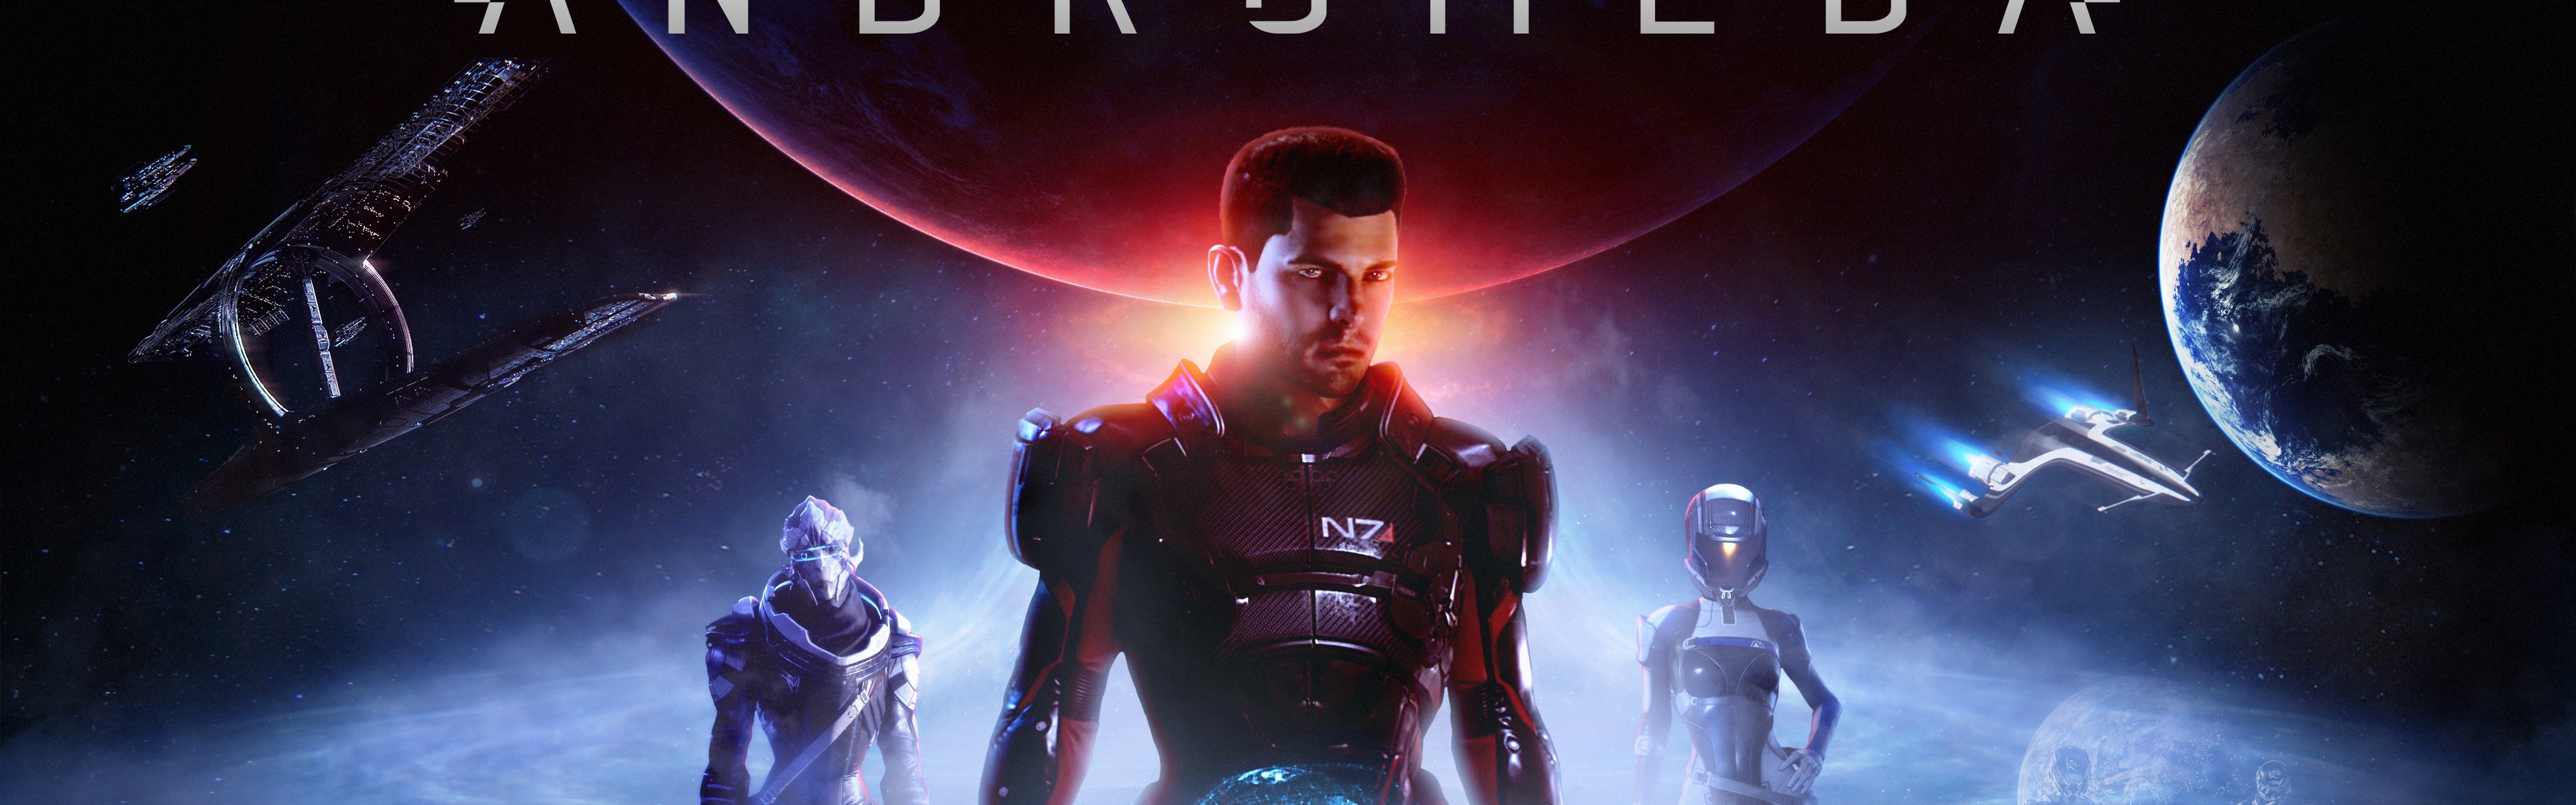 Mass Effect Dual Monitor Wallpapers